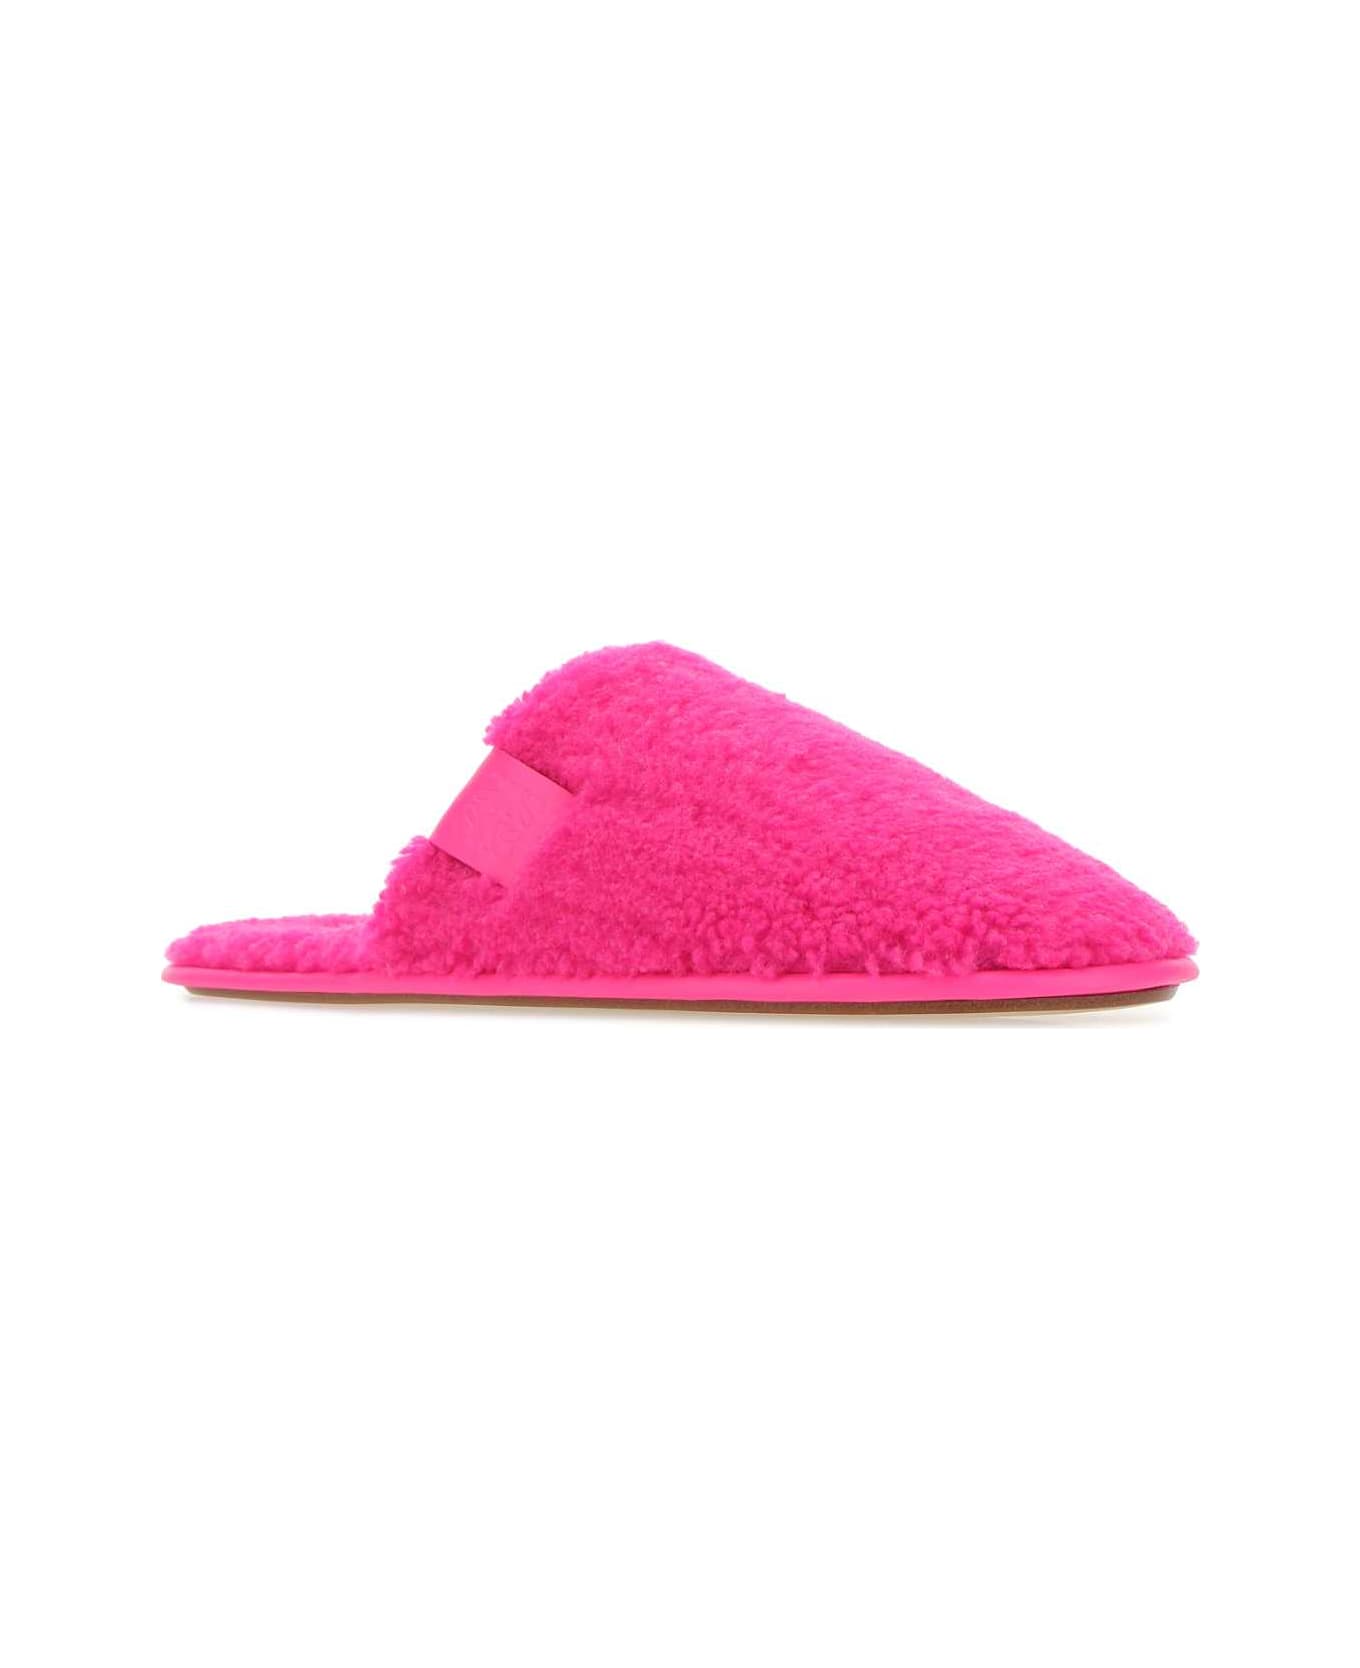 Loewe Fluo Pink Eco Shearling Slippers - NEONPINK